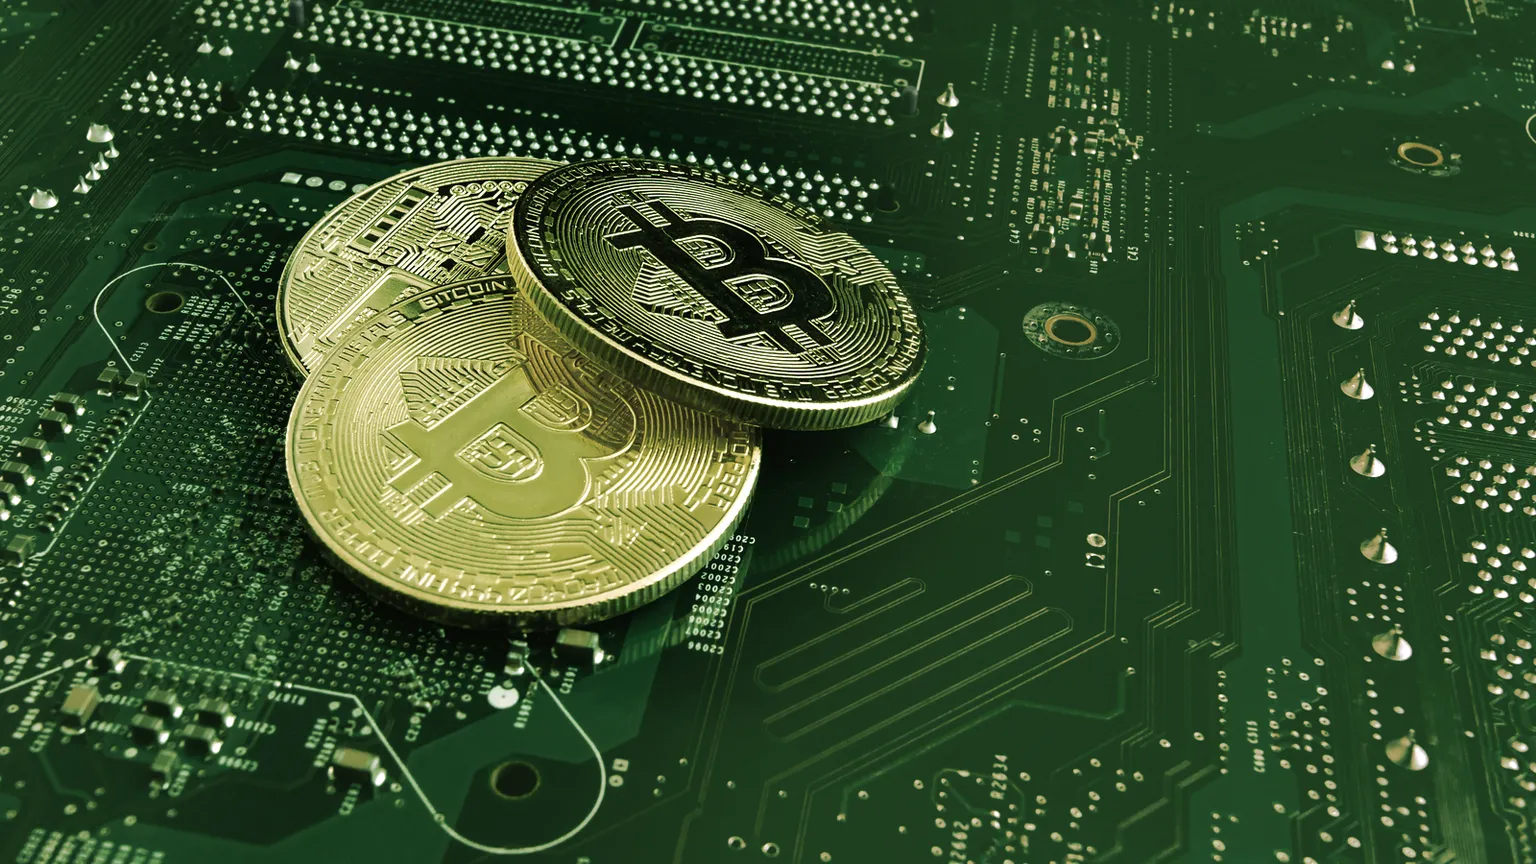 Bitcoin is the world's largest cryptocurrency. Image: Shutterstock